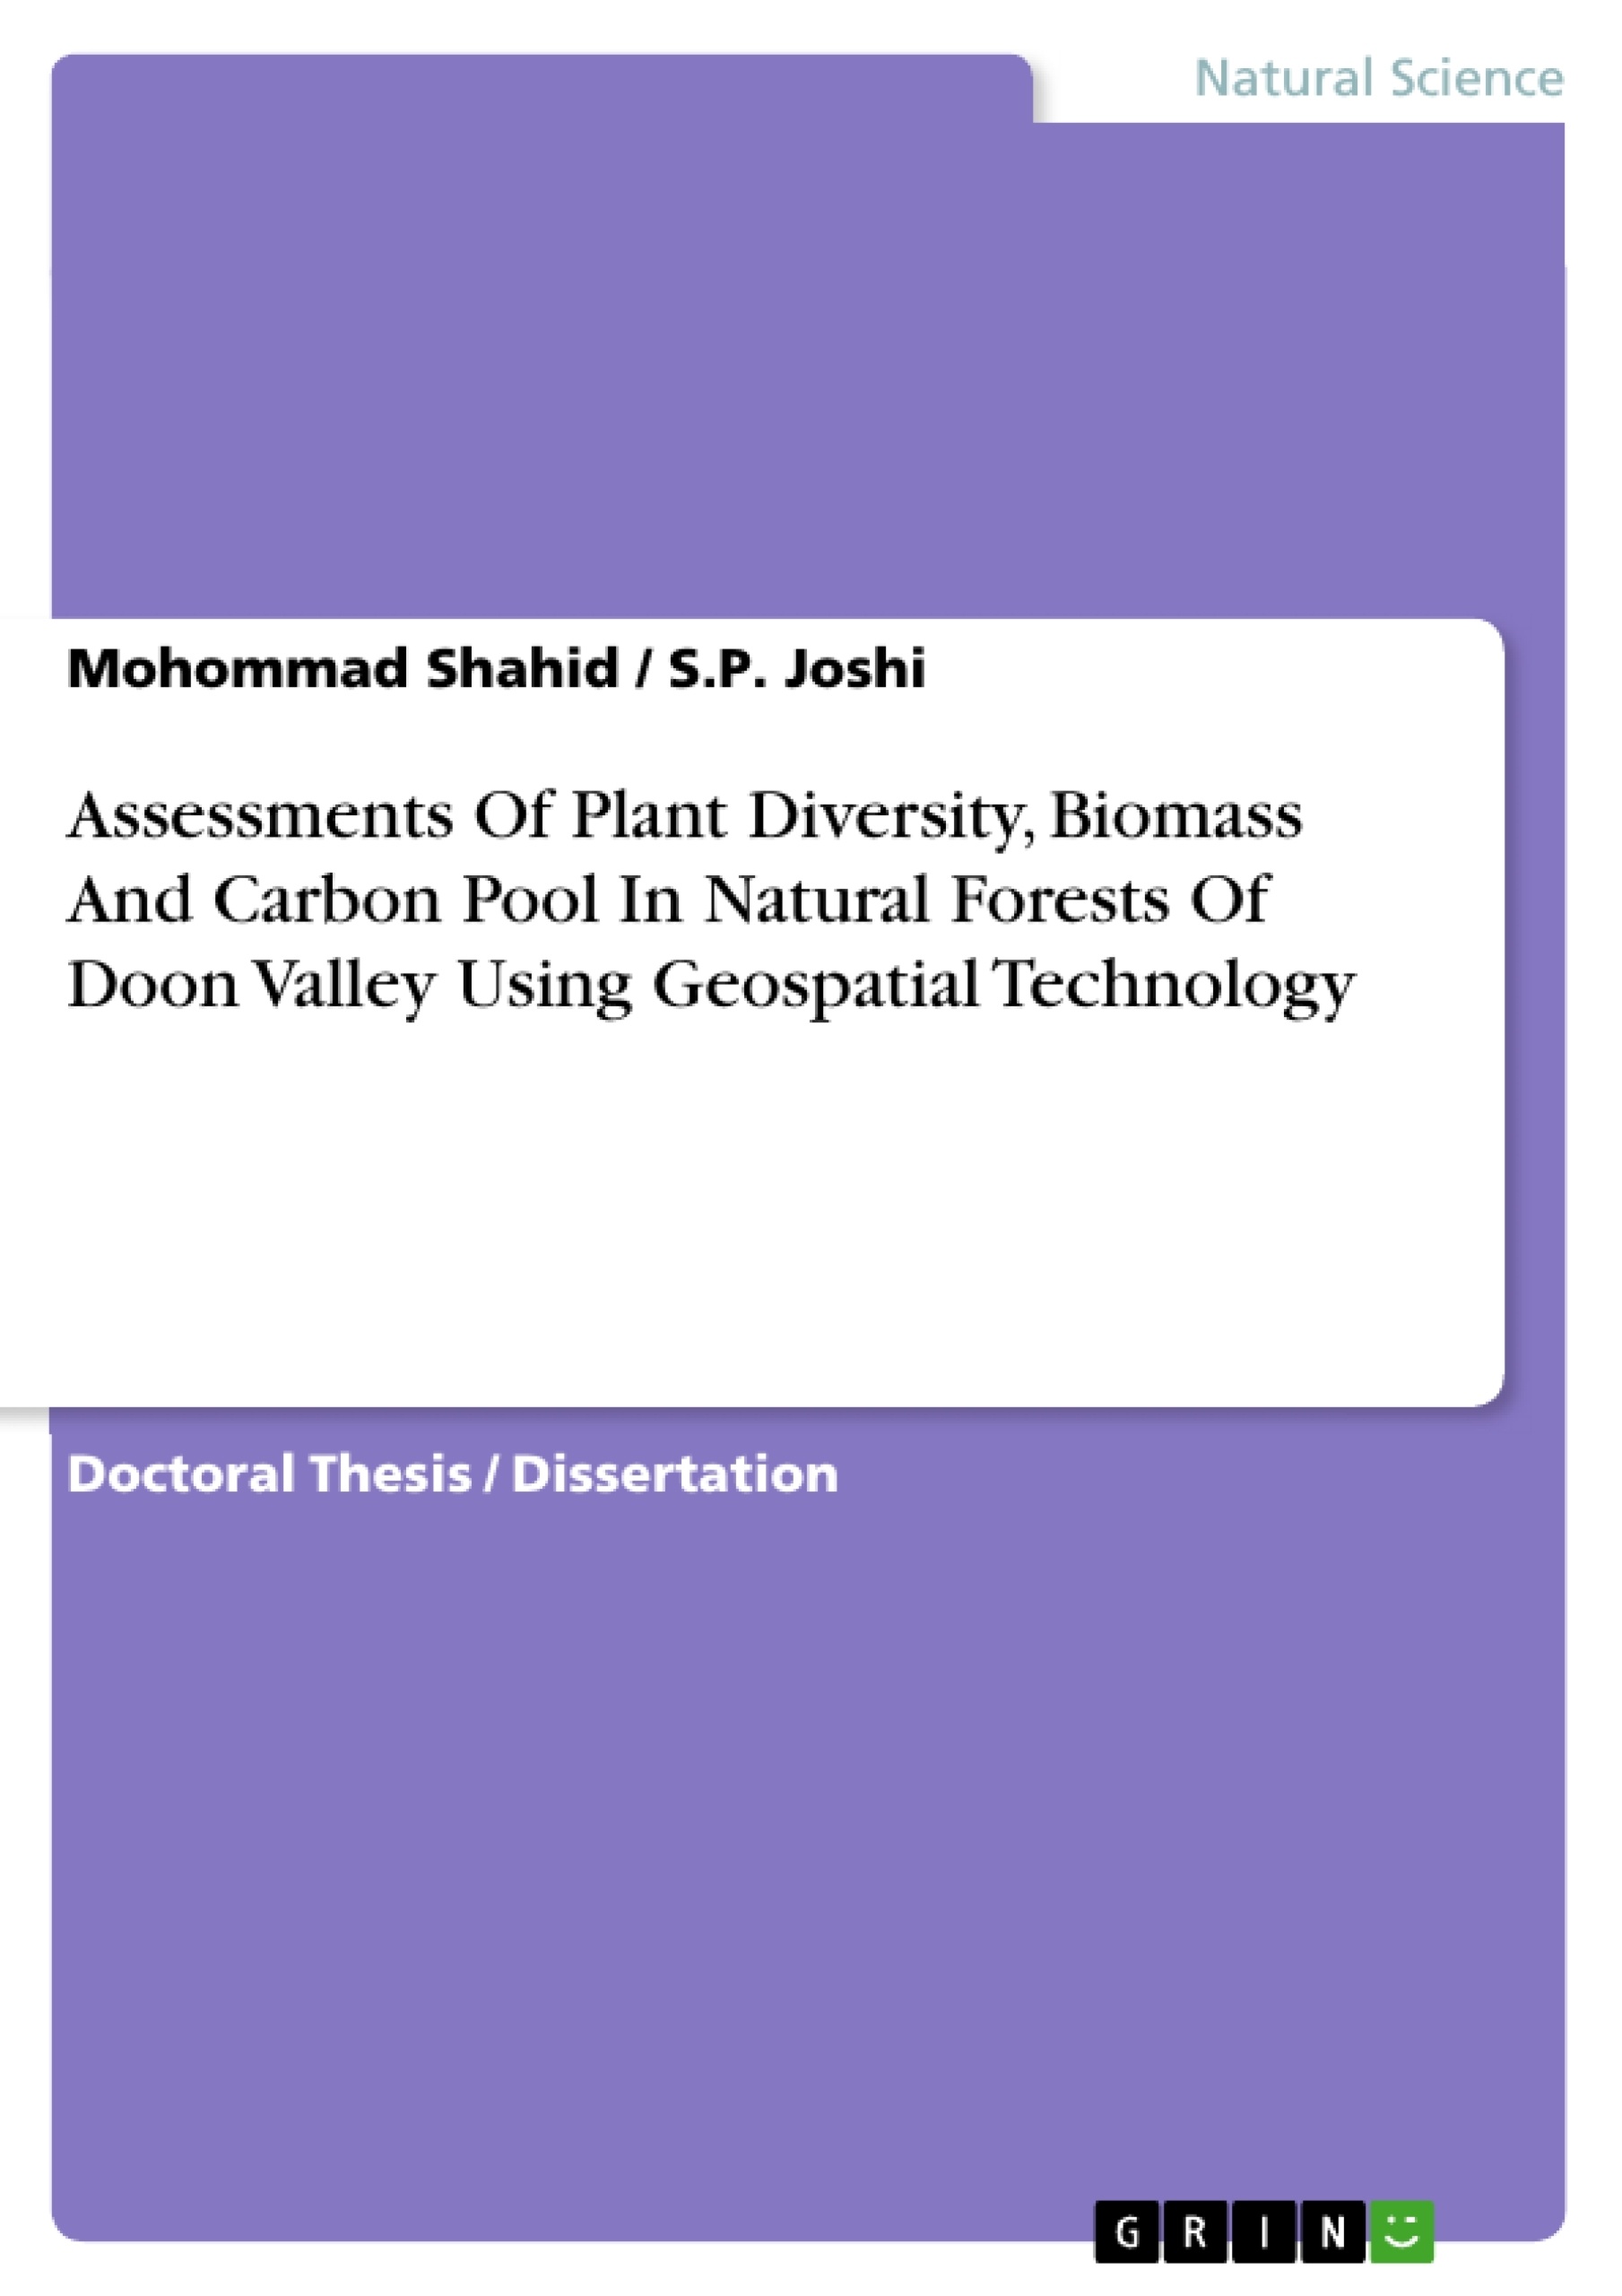 Title: Assessments Of Plant Diversity, Biomass And Carbon Pool In Natural Forests Of Doon Valley Using Geospatial Technology